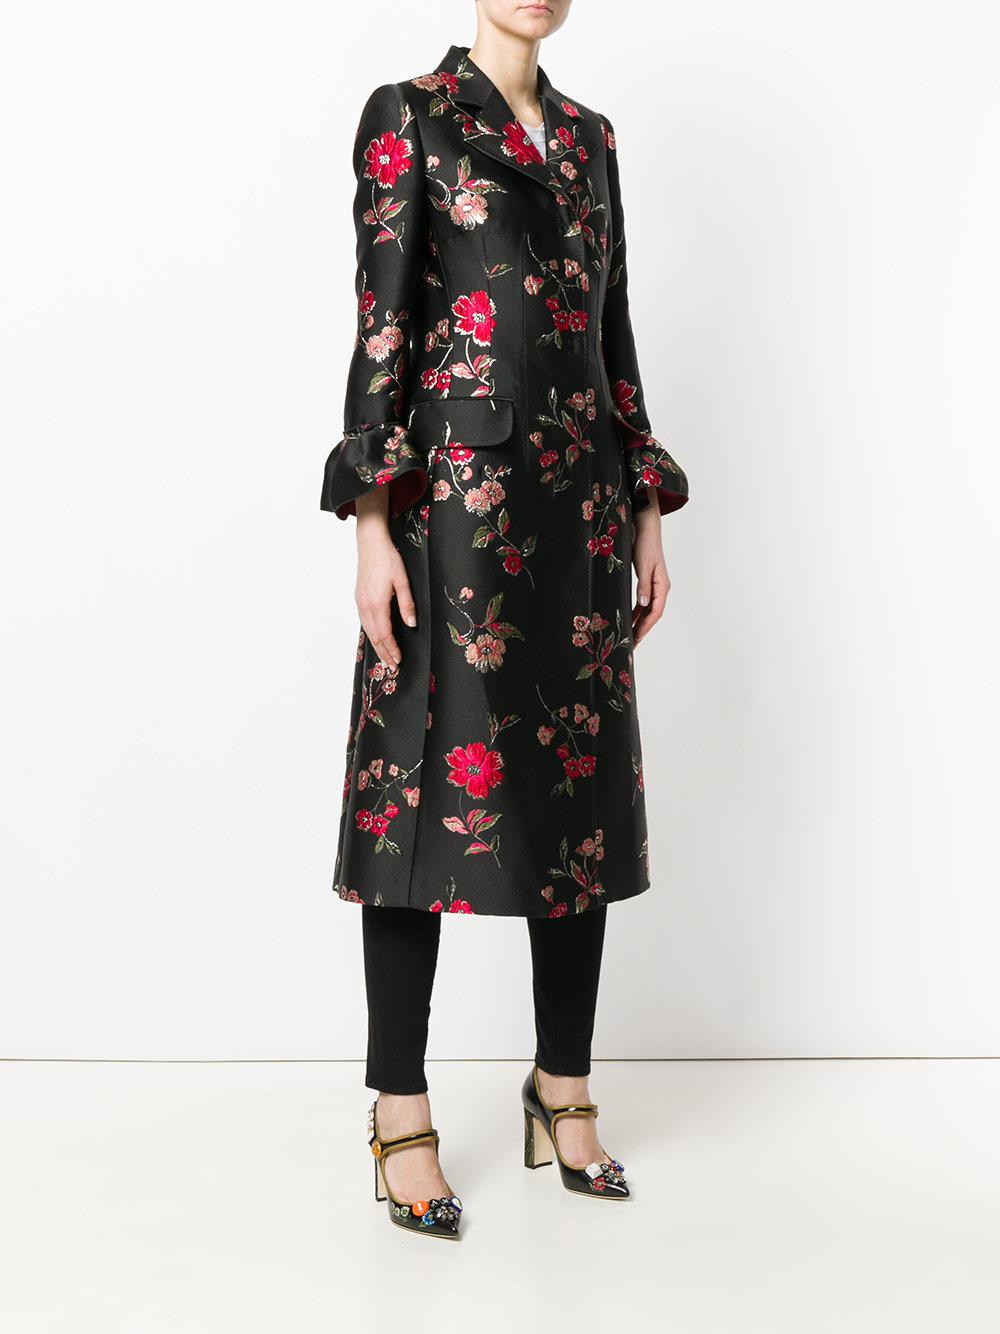 Dolce & Gabbana Lace Floral Jacquard Coat in Black - Lyst